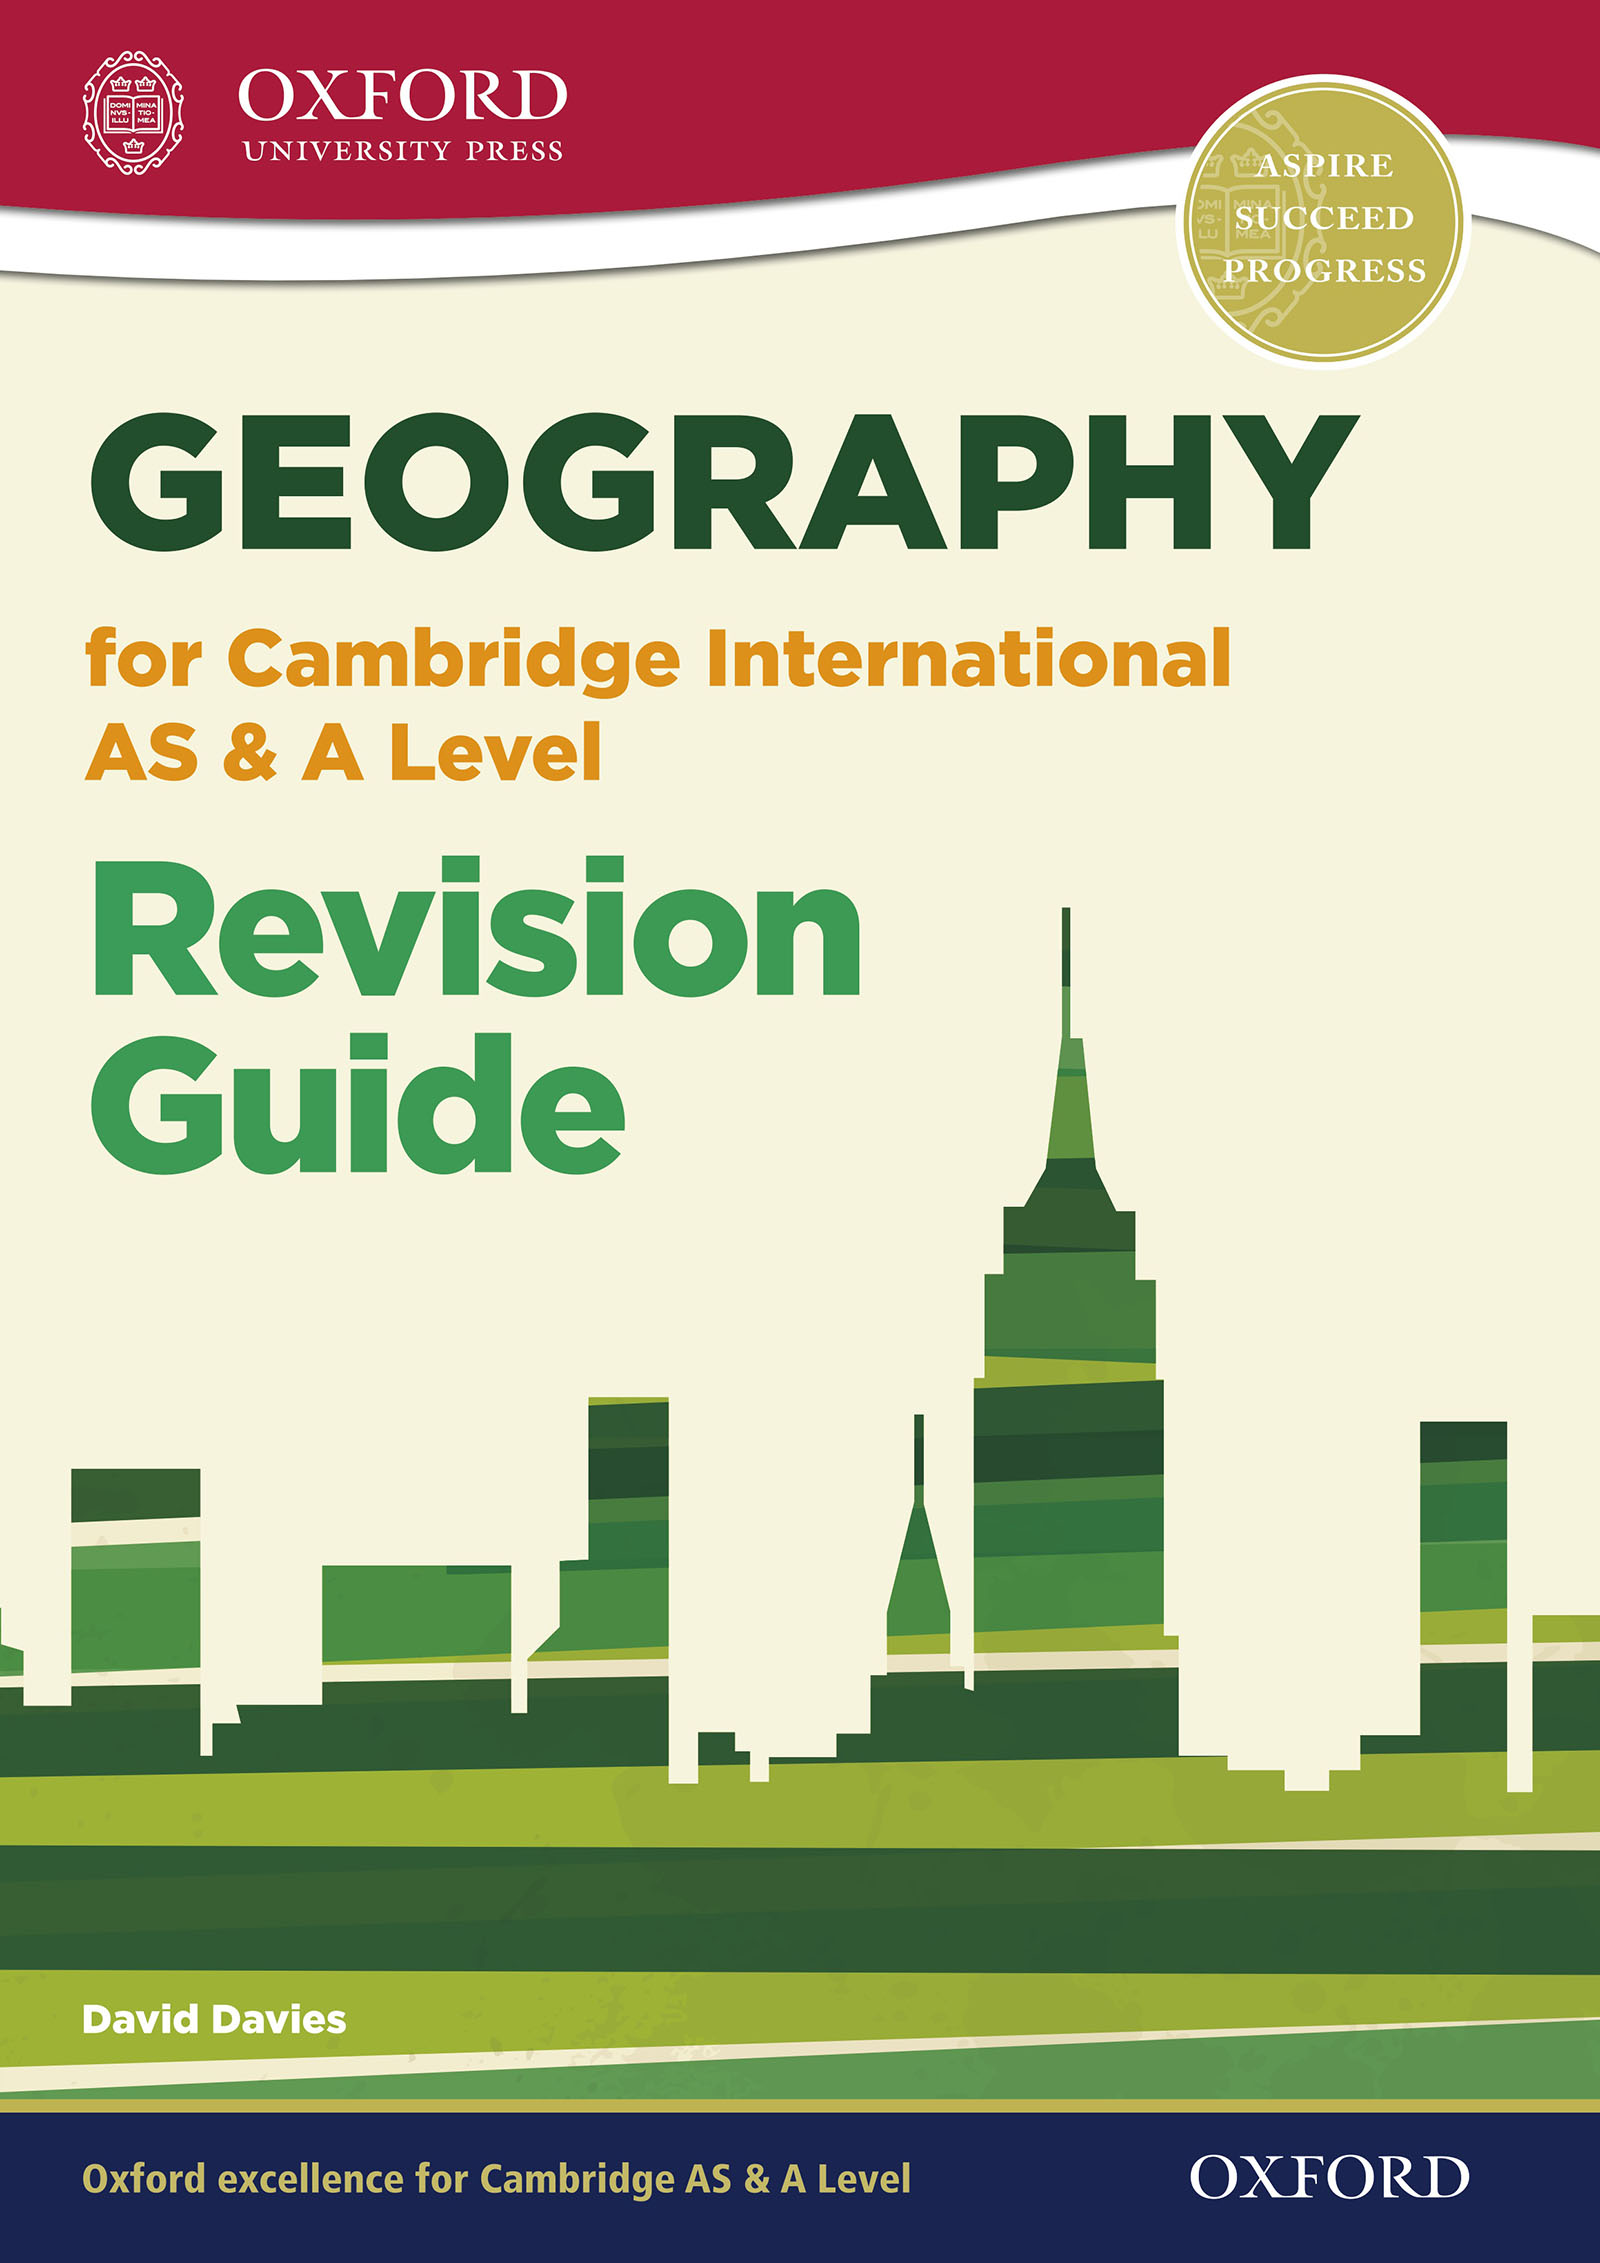 Geography for Cambridge International AS & A Level Revision Guide